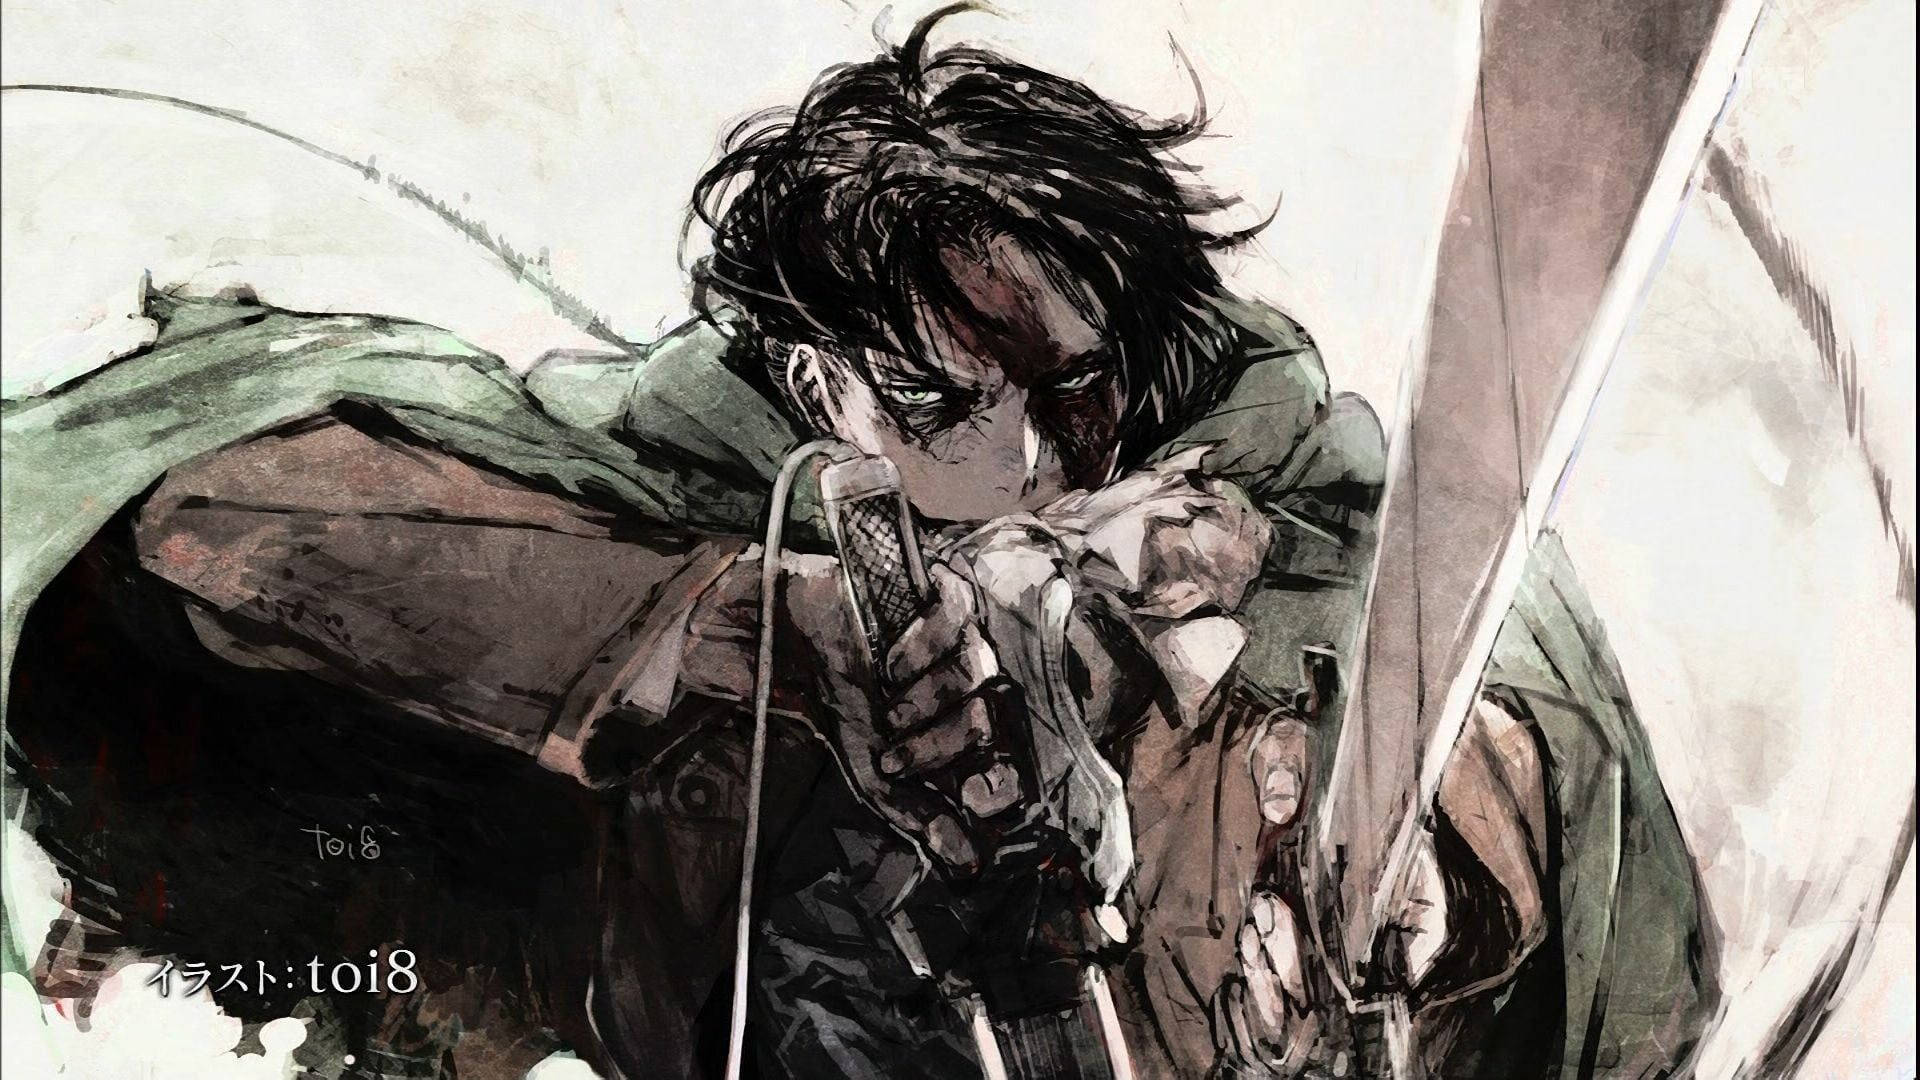 Levi Ackerman 1920X1080 Wallpaper and Background Image